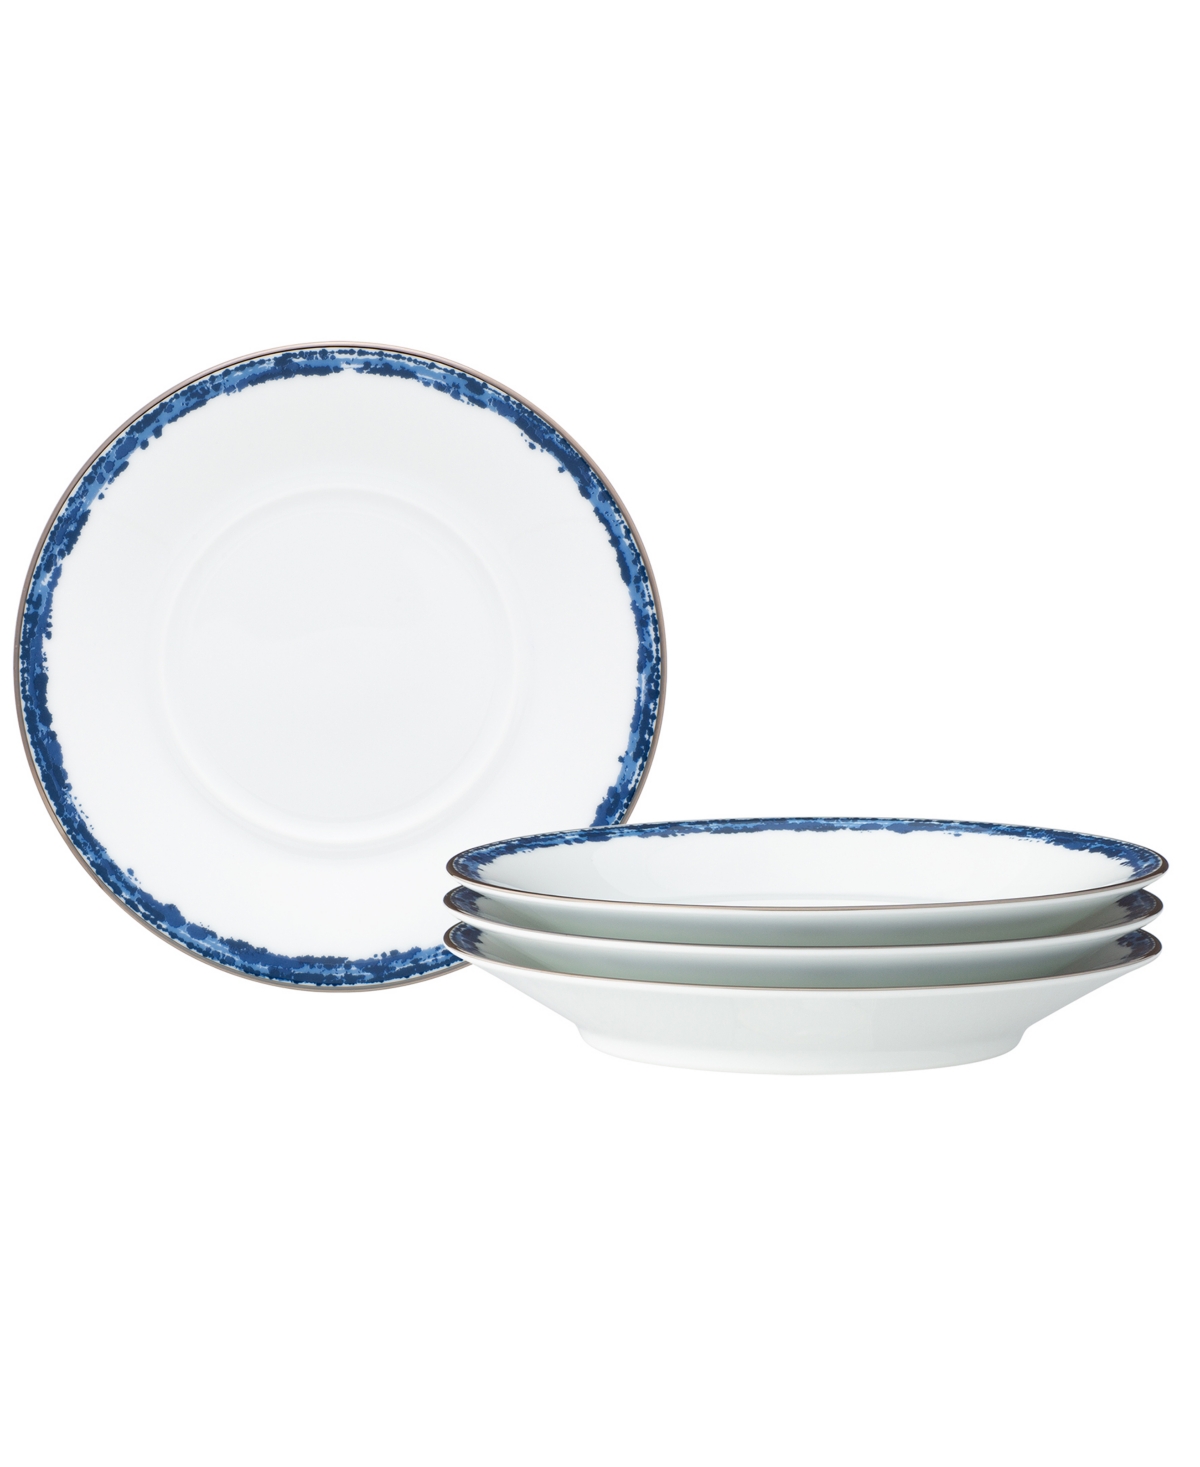 Noritake Rill 4 Piece Saucer Set, Service For 4 In Blue